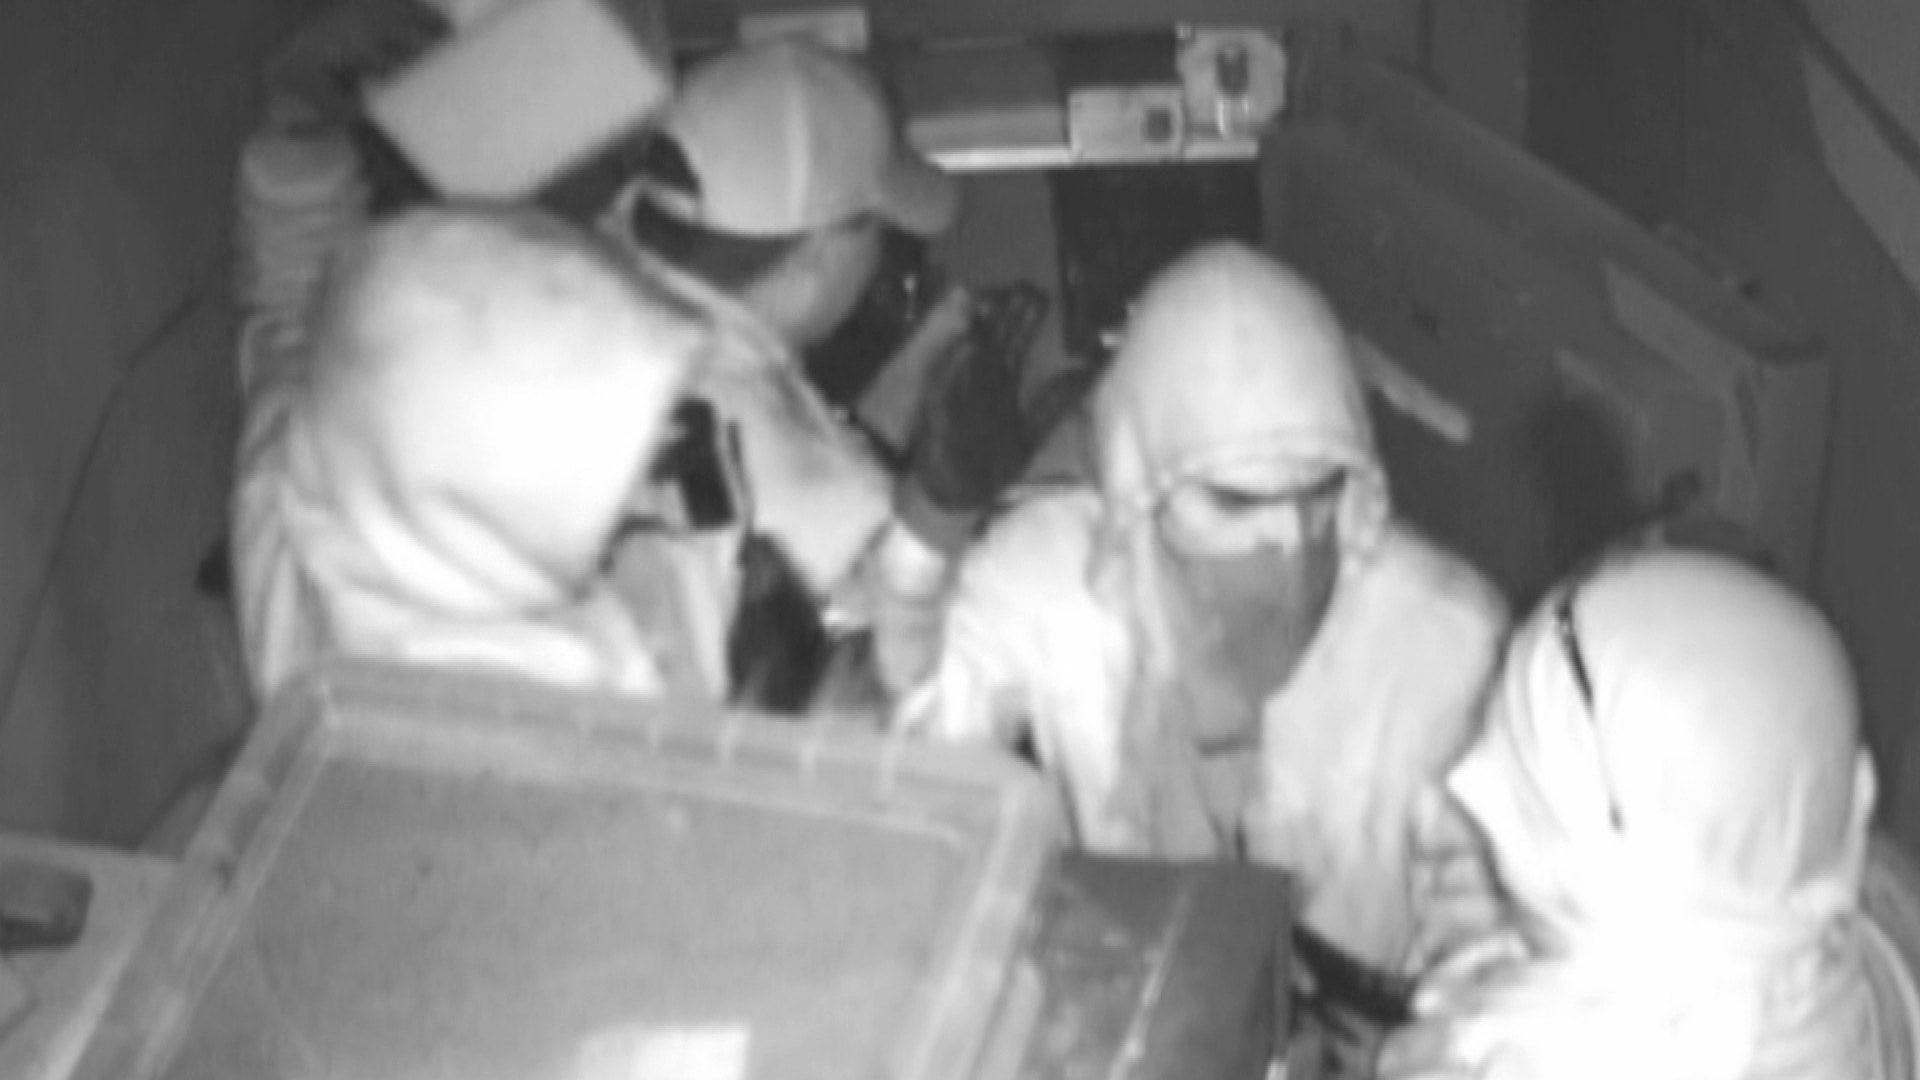 Brazen Thieves High-Five Each Other After Jewelry Heist 